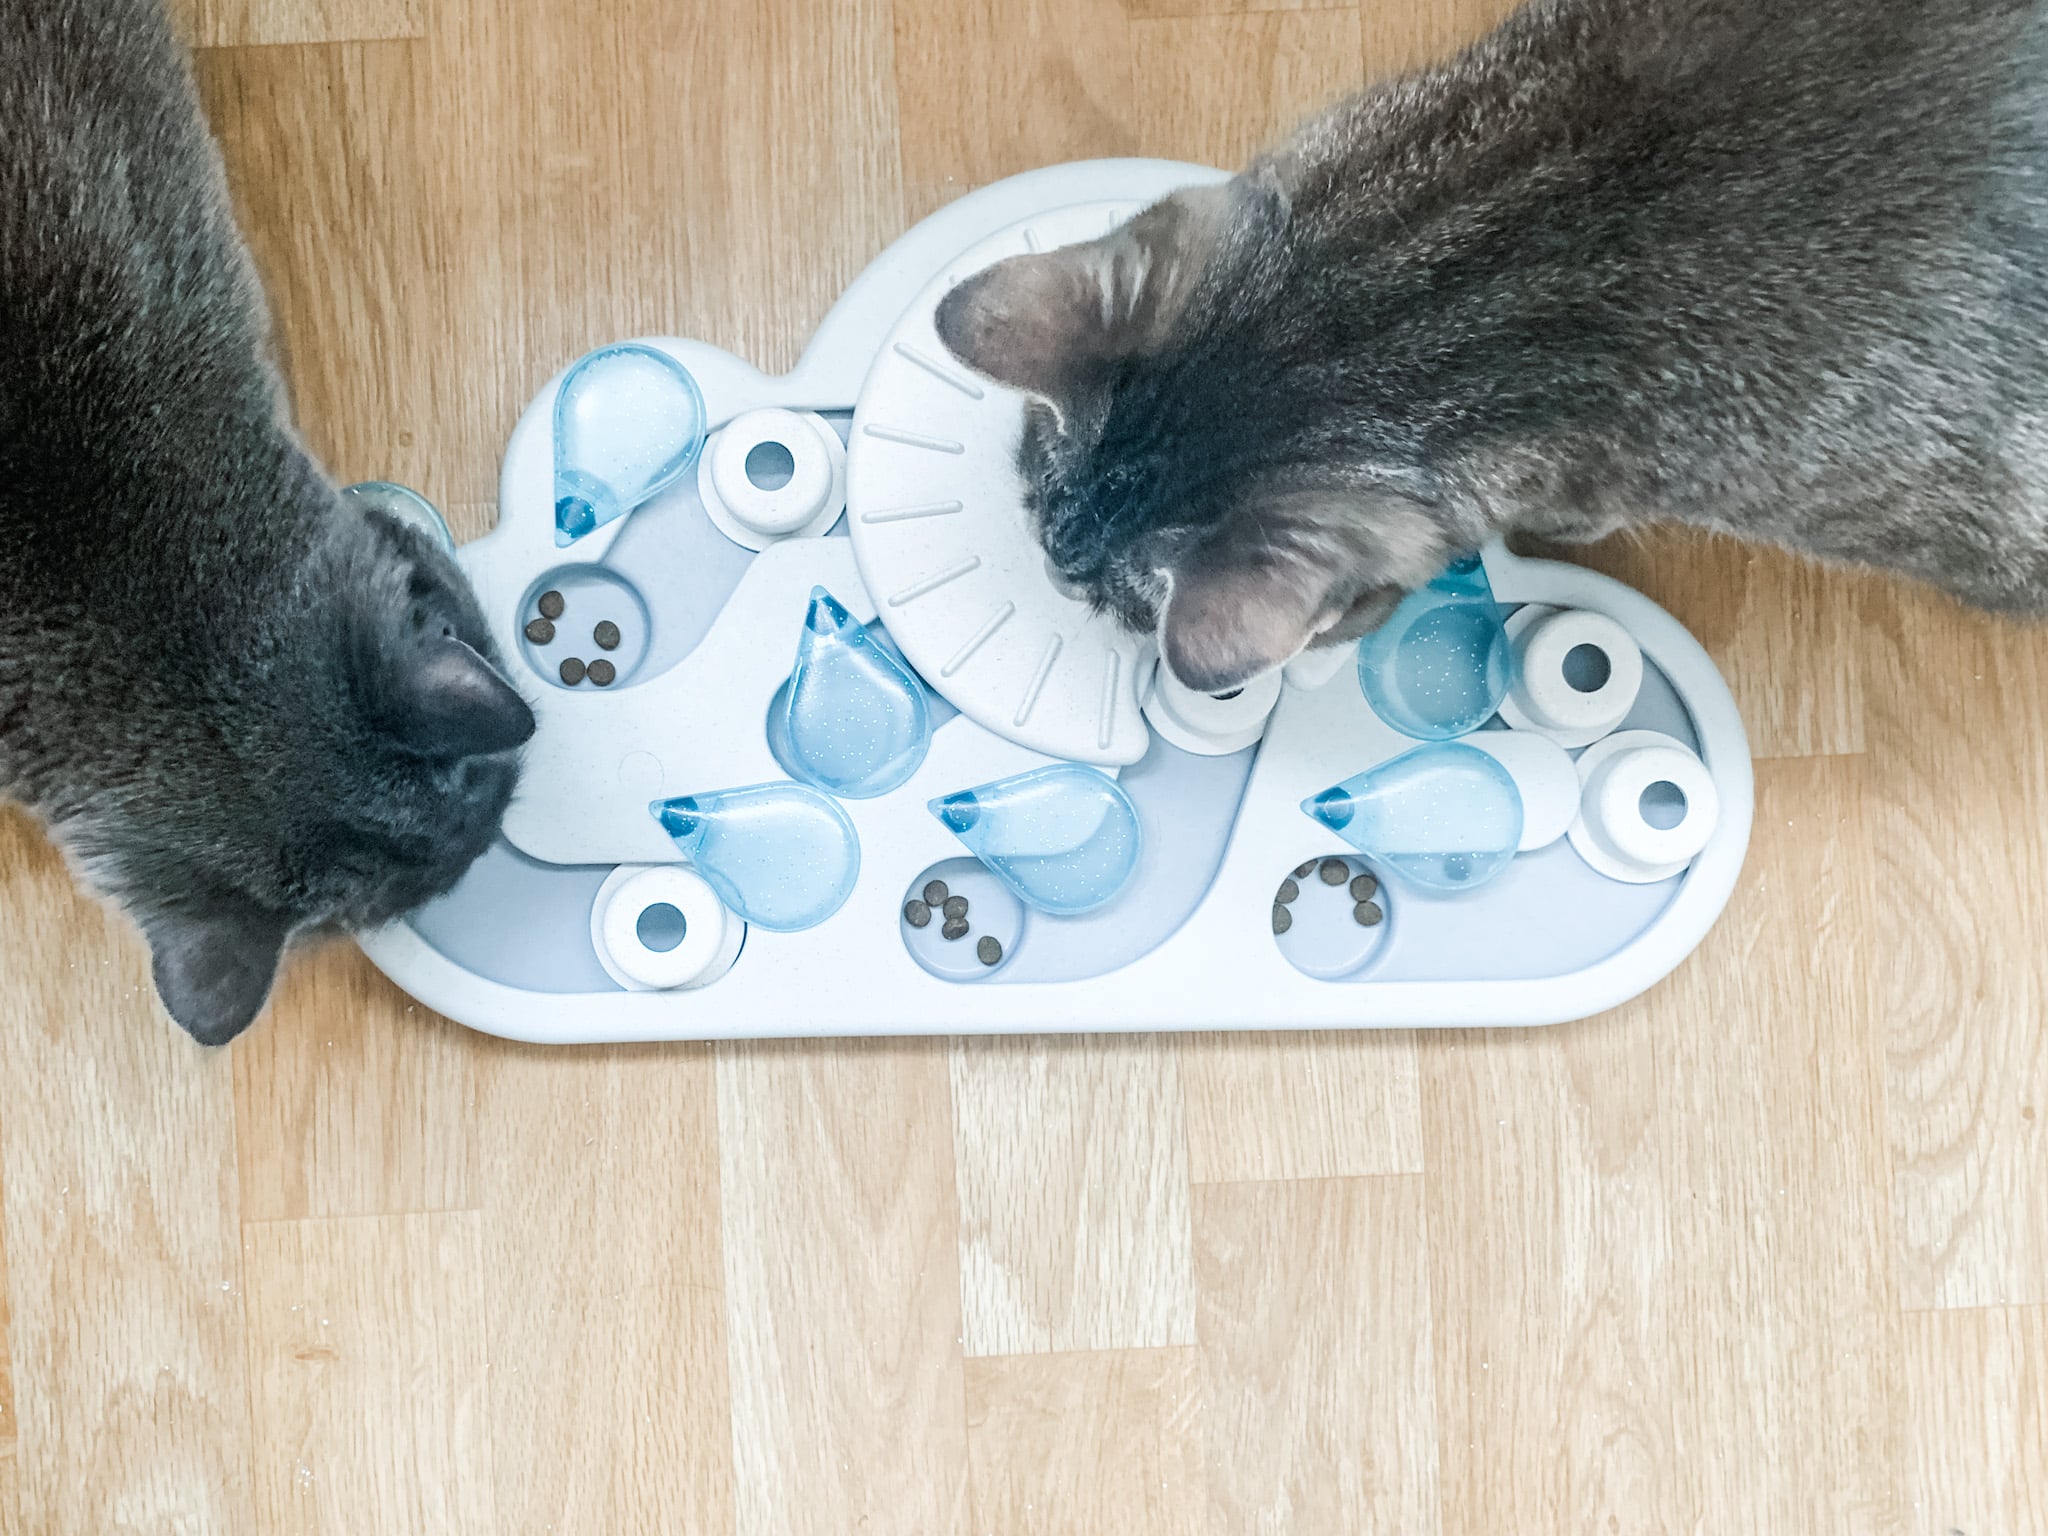 Cat Slow-Feeder Puzzle Review, PetStages Rainy Day